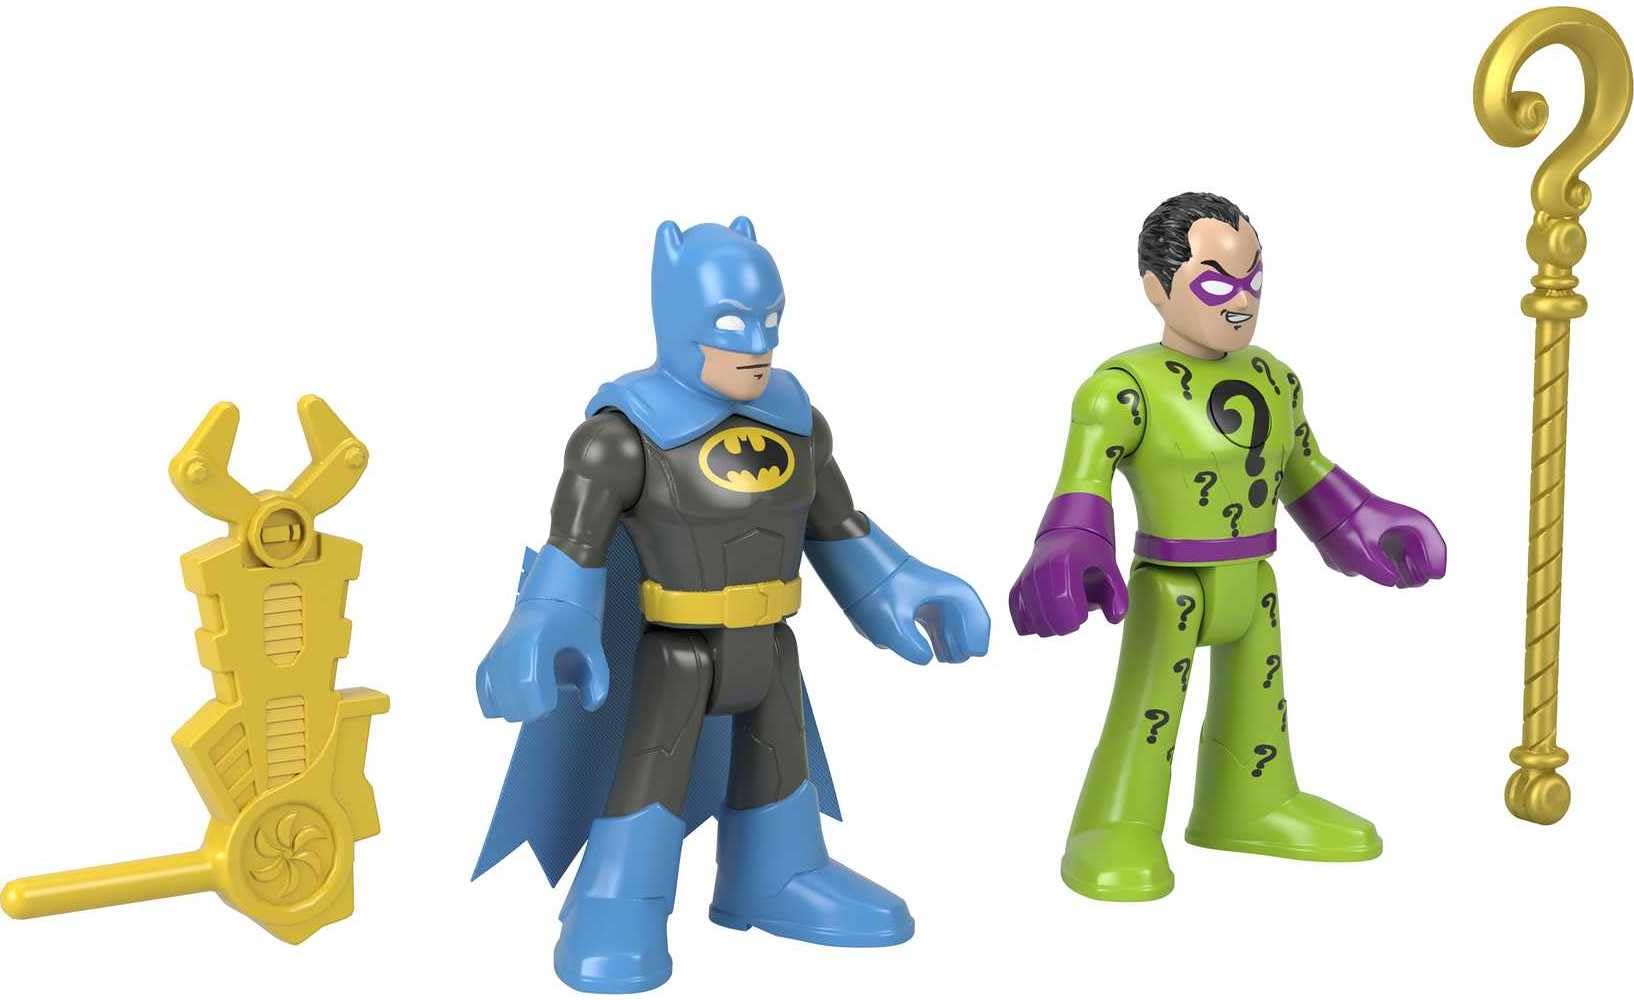 Fisher-Price Imaginext DC Super Friends Batman & The Riddler Figure Set for Preschool Kids Ages 3 to 8 Years